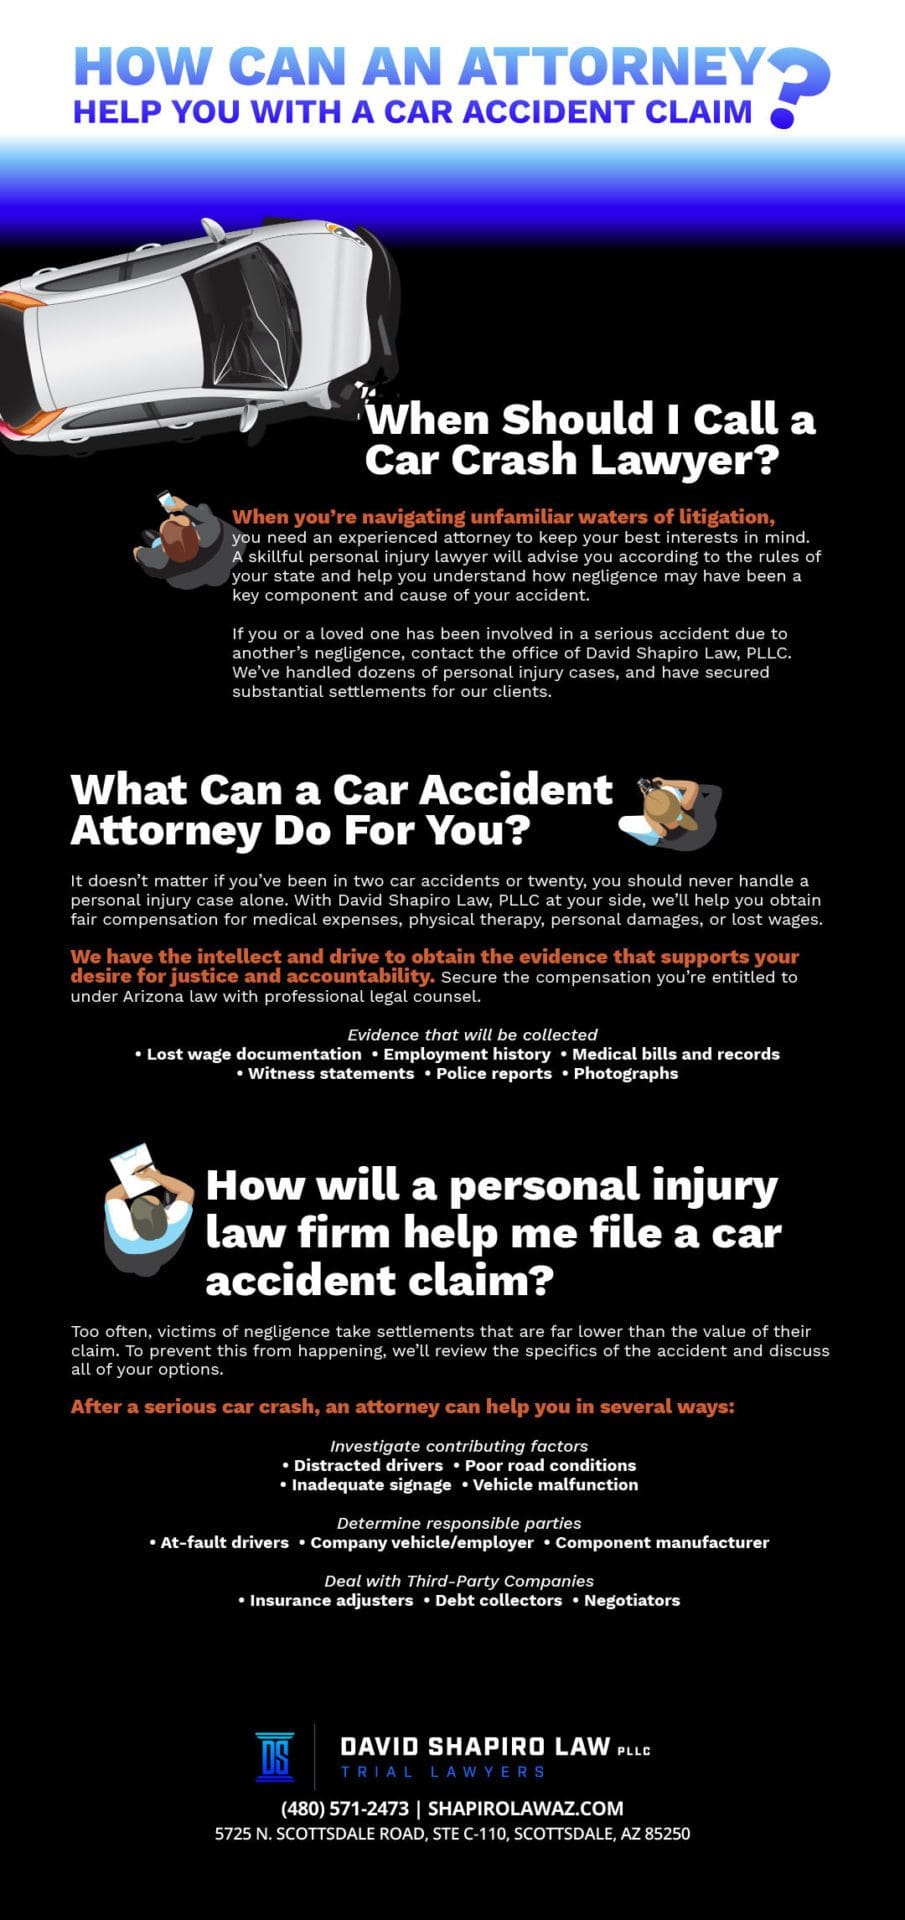 How-can-attorney-help-with-car-accident-claim